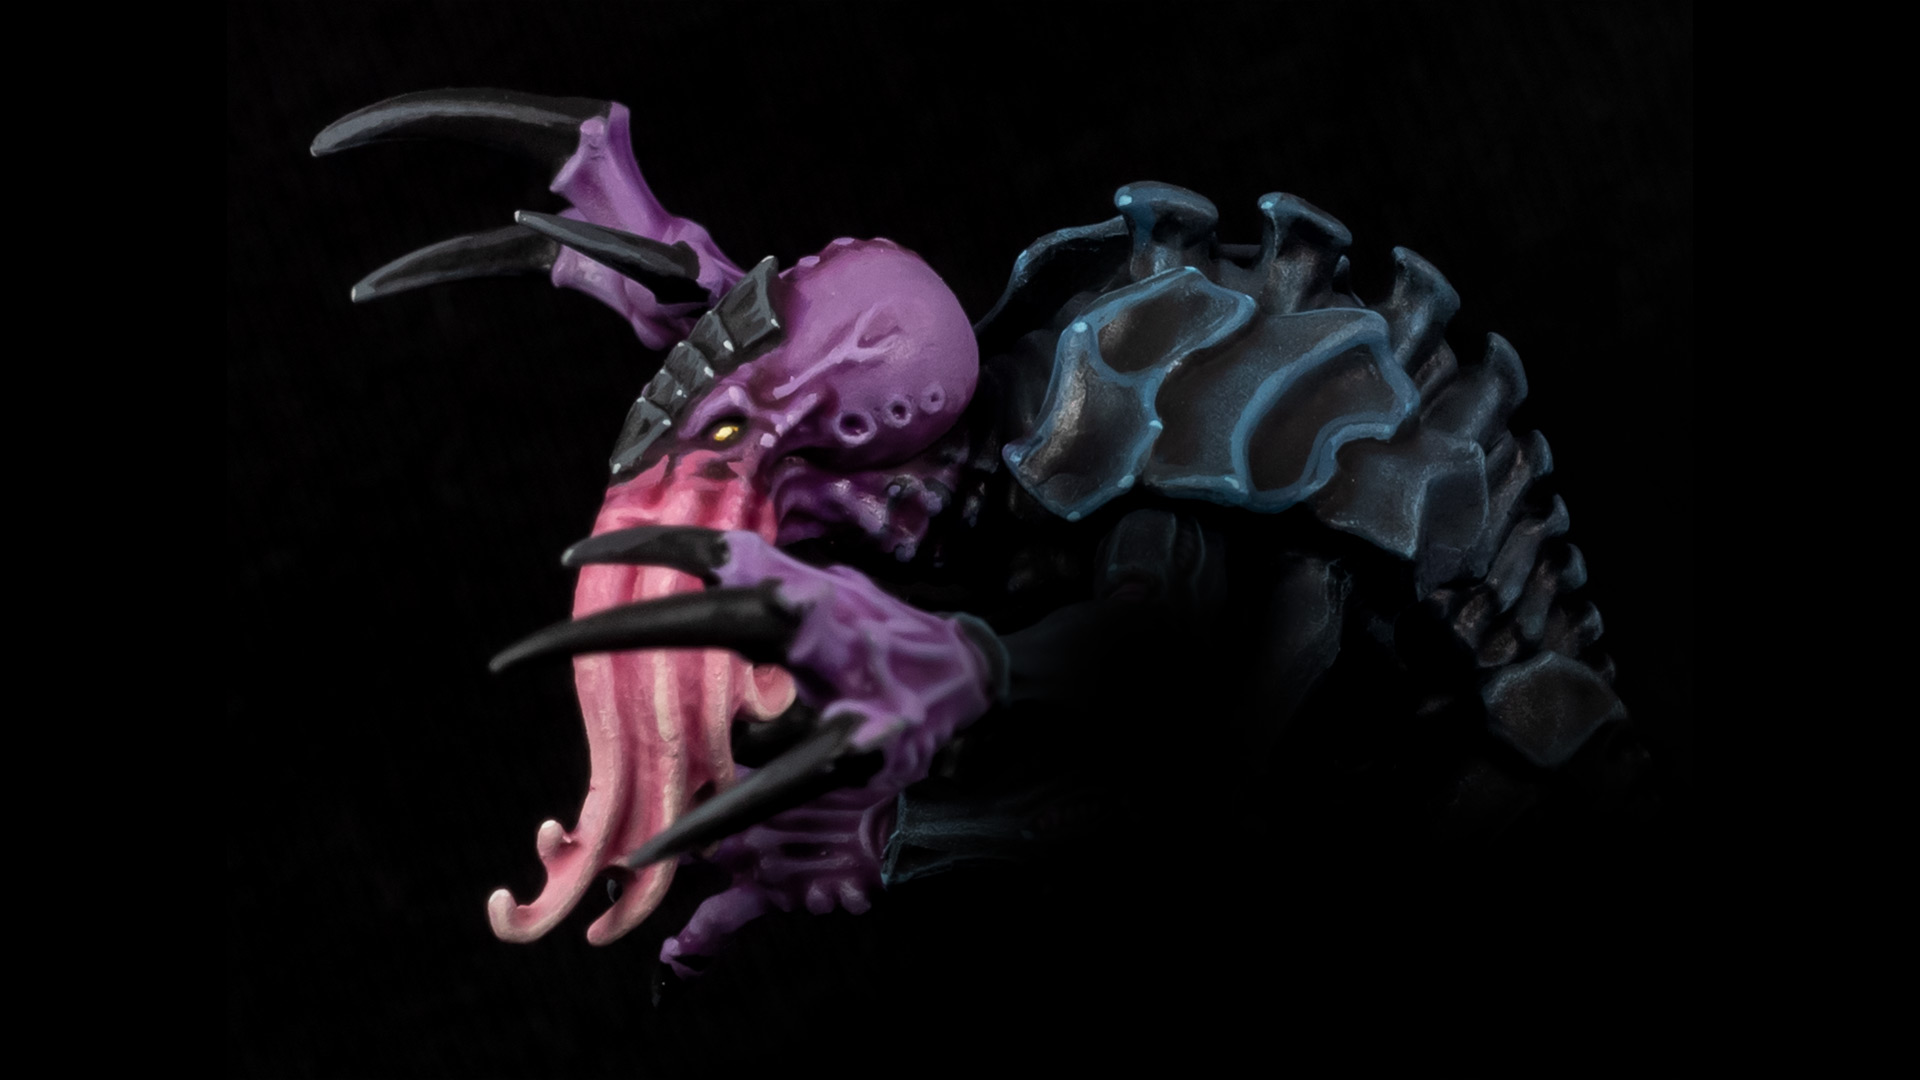 Tyranids Genestealer painted with Pro Acryl paints